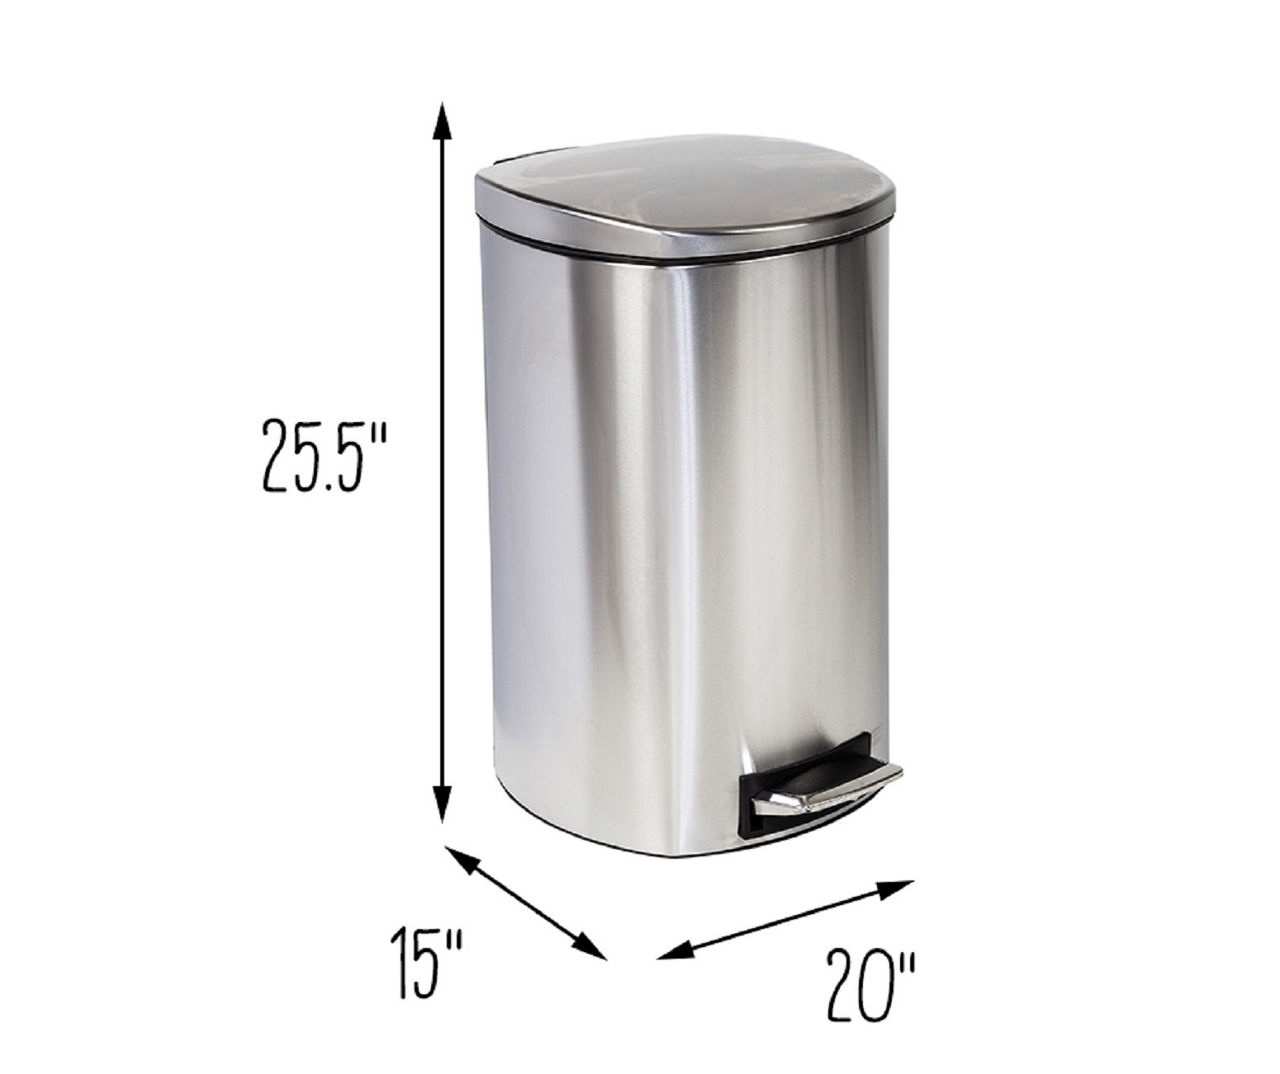 50 Liter SoftStep Stainless Steel Kitchen Trash Can, Size: 13 Gal